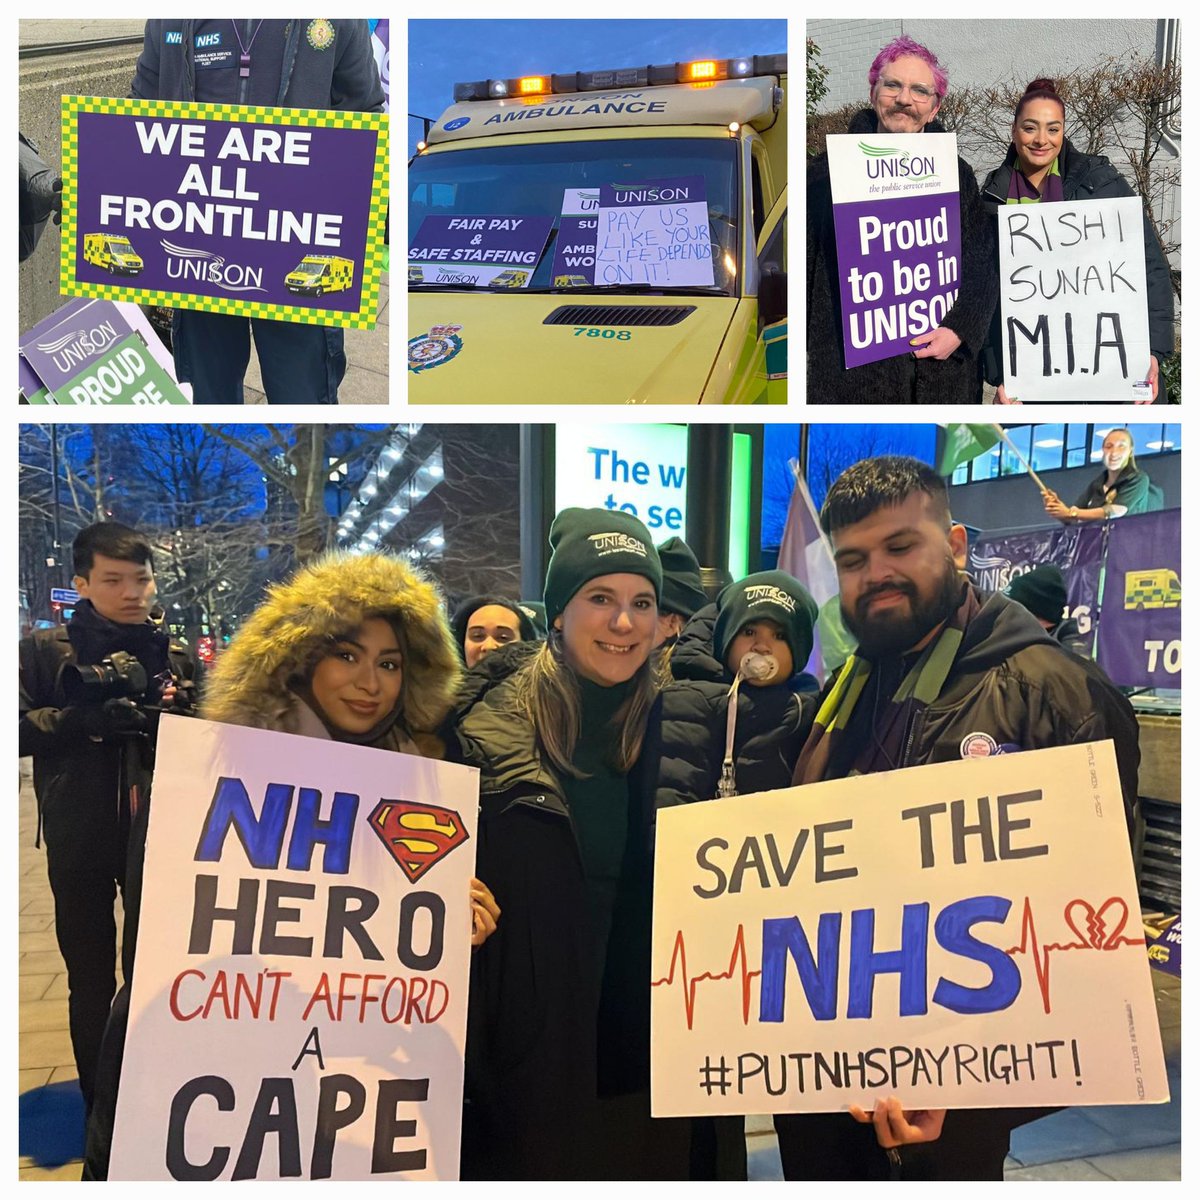 'Pay us like your life depends on it'
Getting the message out loud & clear 
Heroes without capes 🦸‍♂️🦸‍♀️
#PutNHSPayRight